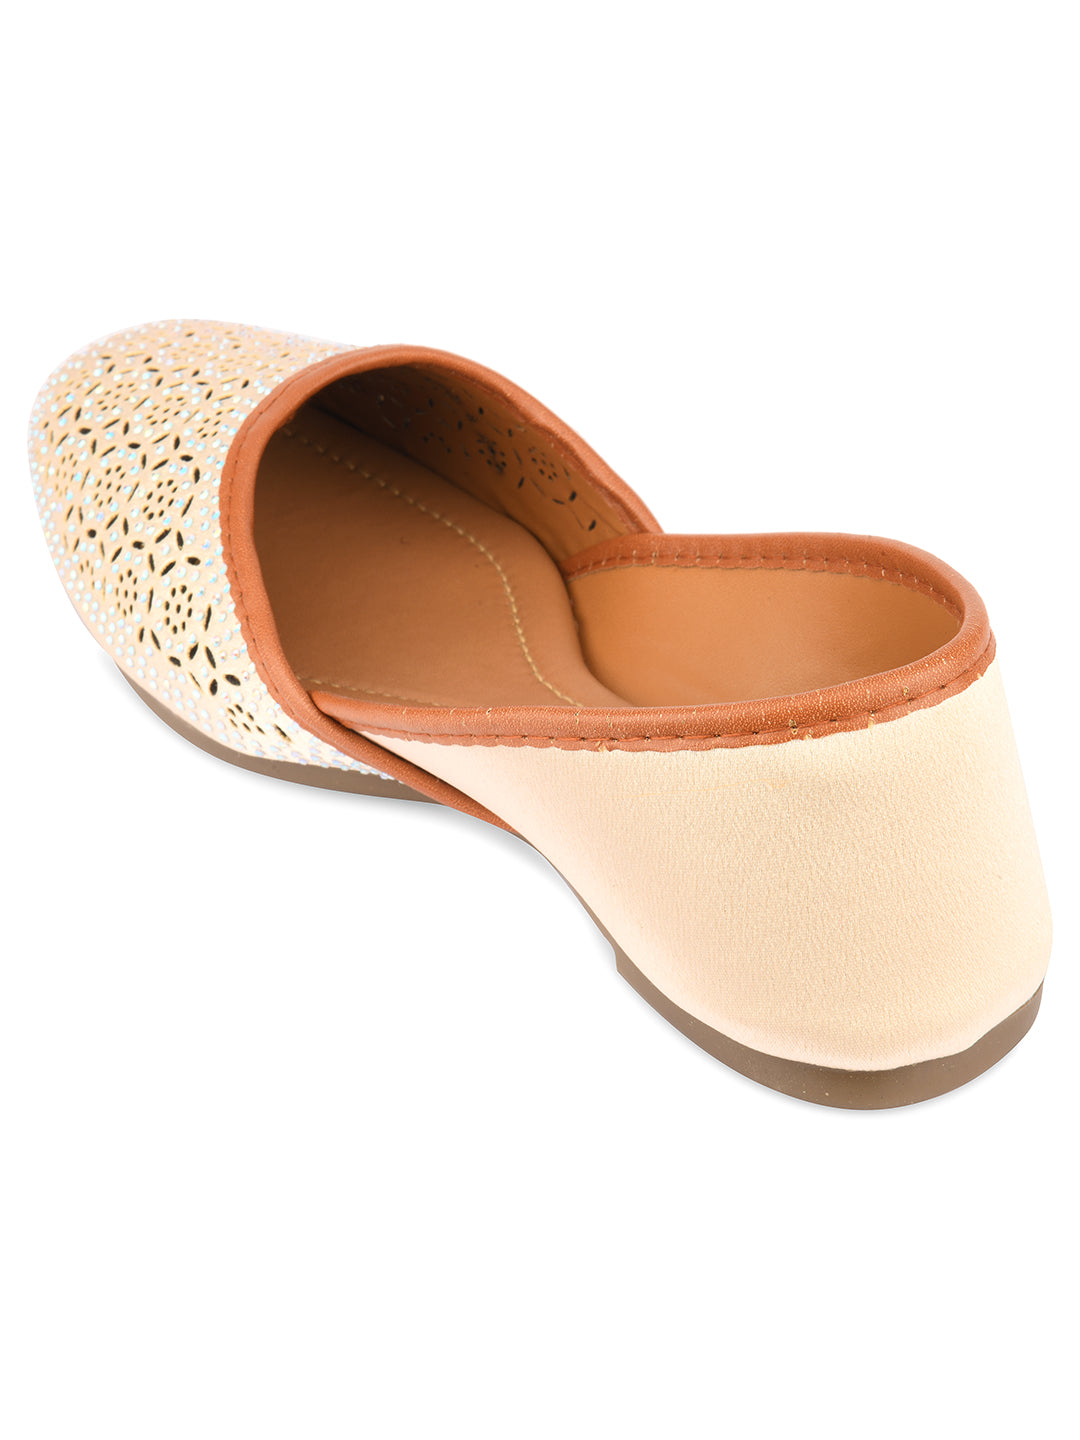 Women's White Handcrafted Stone Work  Indian Ethnic Comfort Footwear - Desi Colour